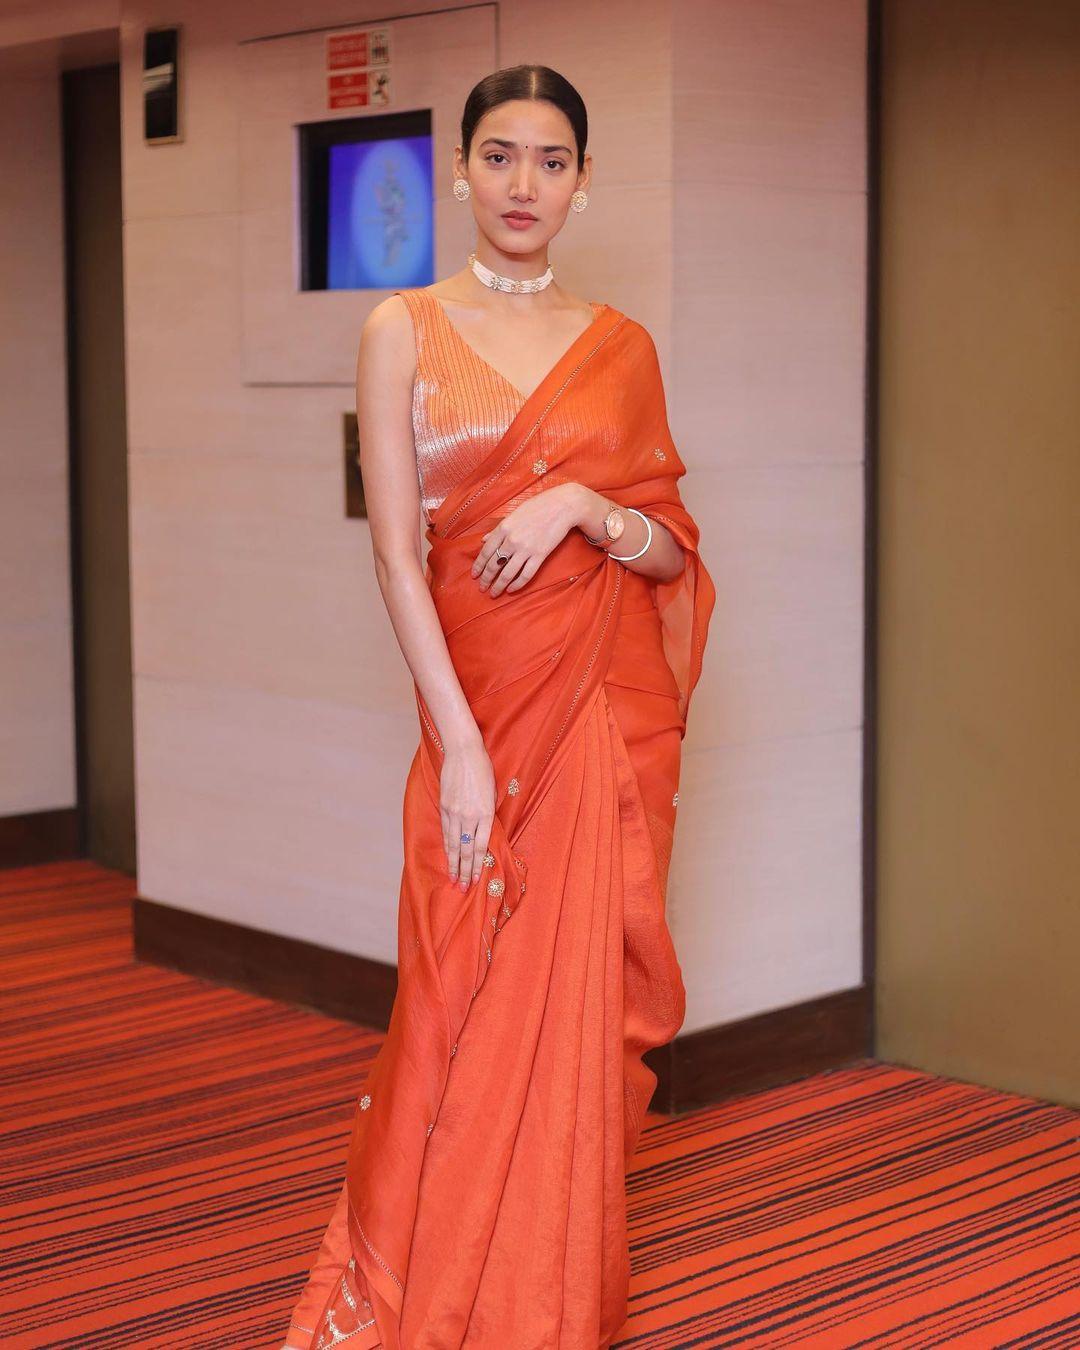 Medha shines in an organza saree in vibrant orange, paired with a matching blouse